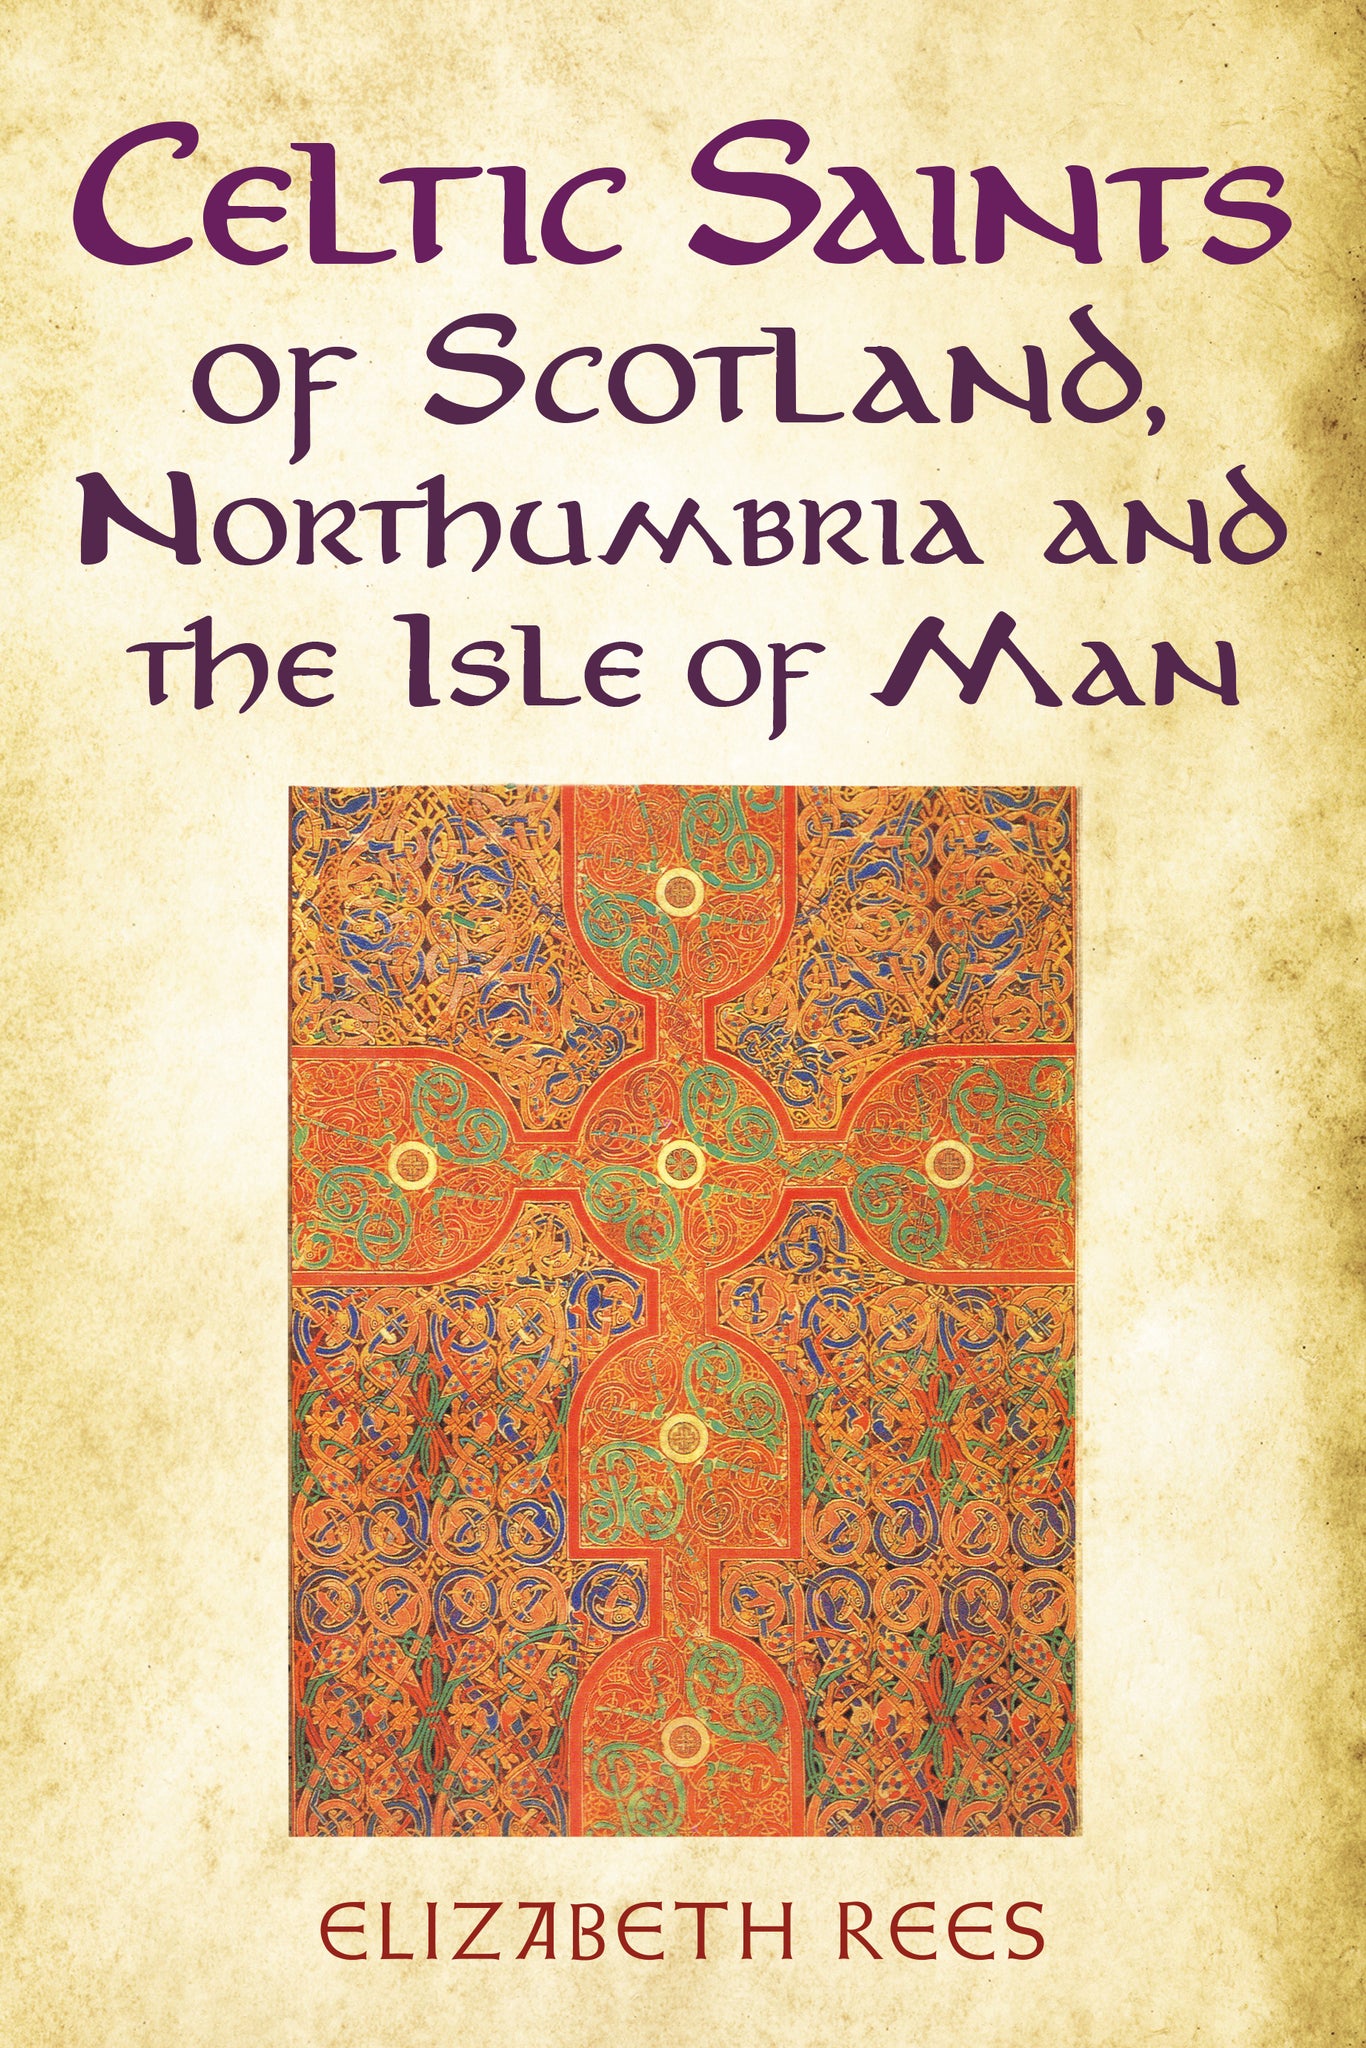 Celtic Saints of Scotland, Northumbria and the Isle of Man - available from Fonthill Media